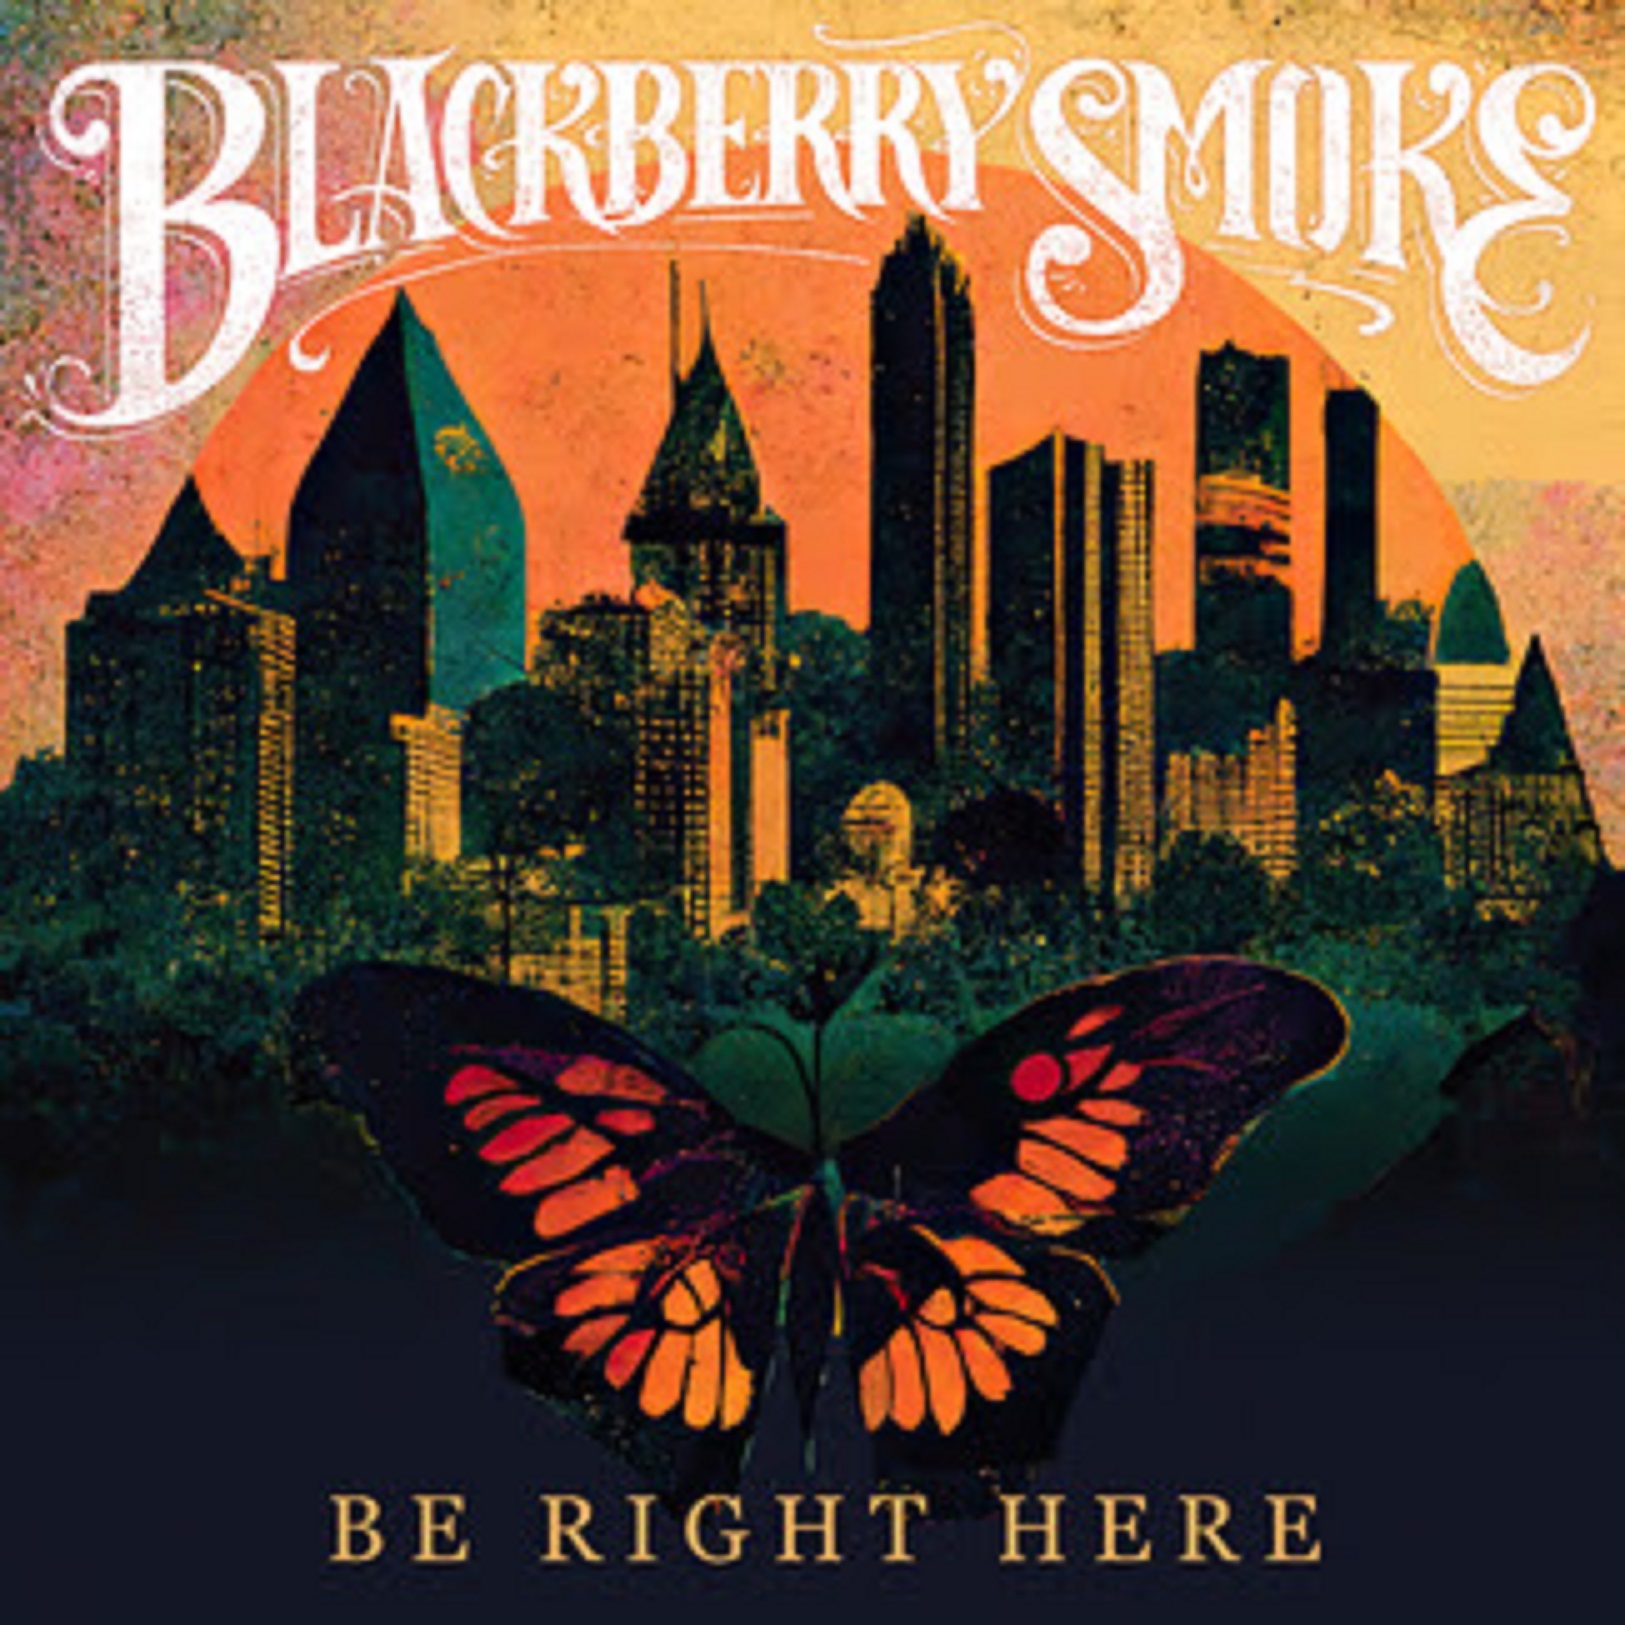 Blackberry Smoke's new album "Be Right Here" out February 16, lead track "Dig A Hole" debuts today